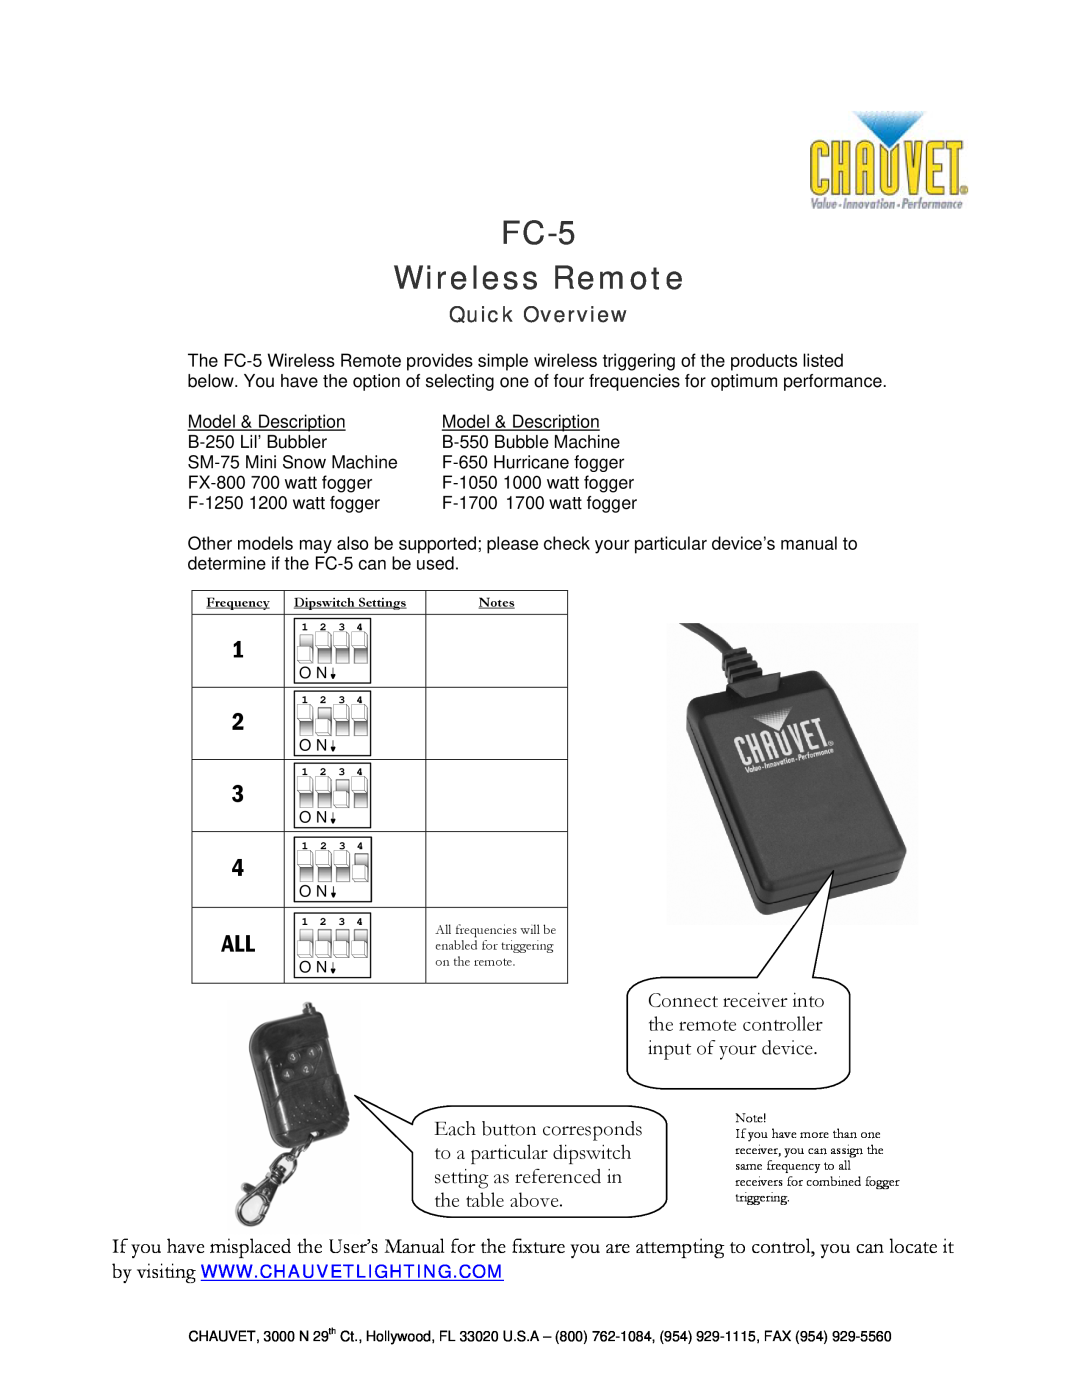 Chauvet user manual FC-5 Wireless Remote, Quick Overview 